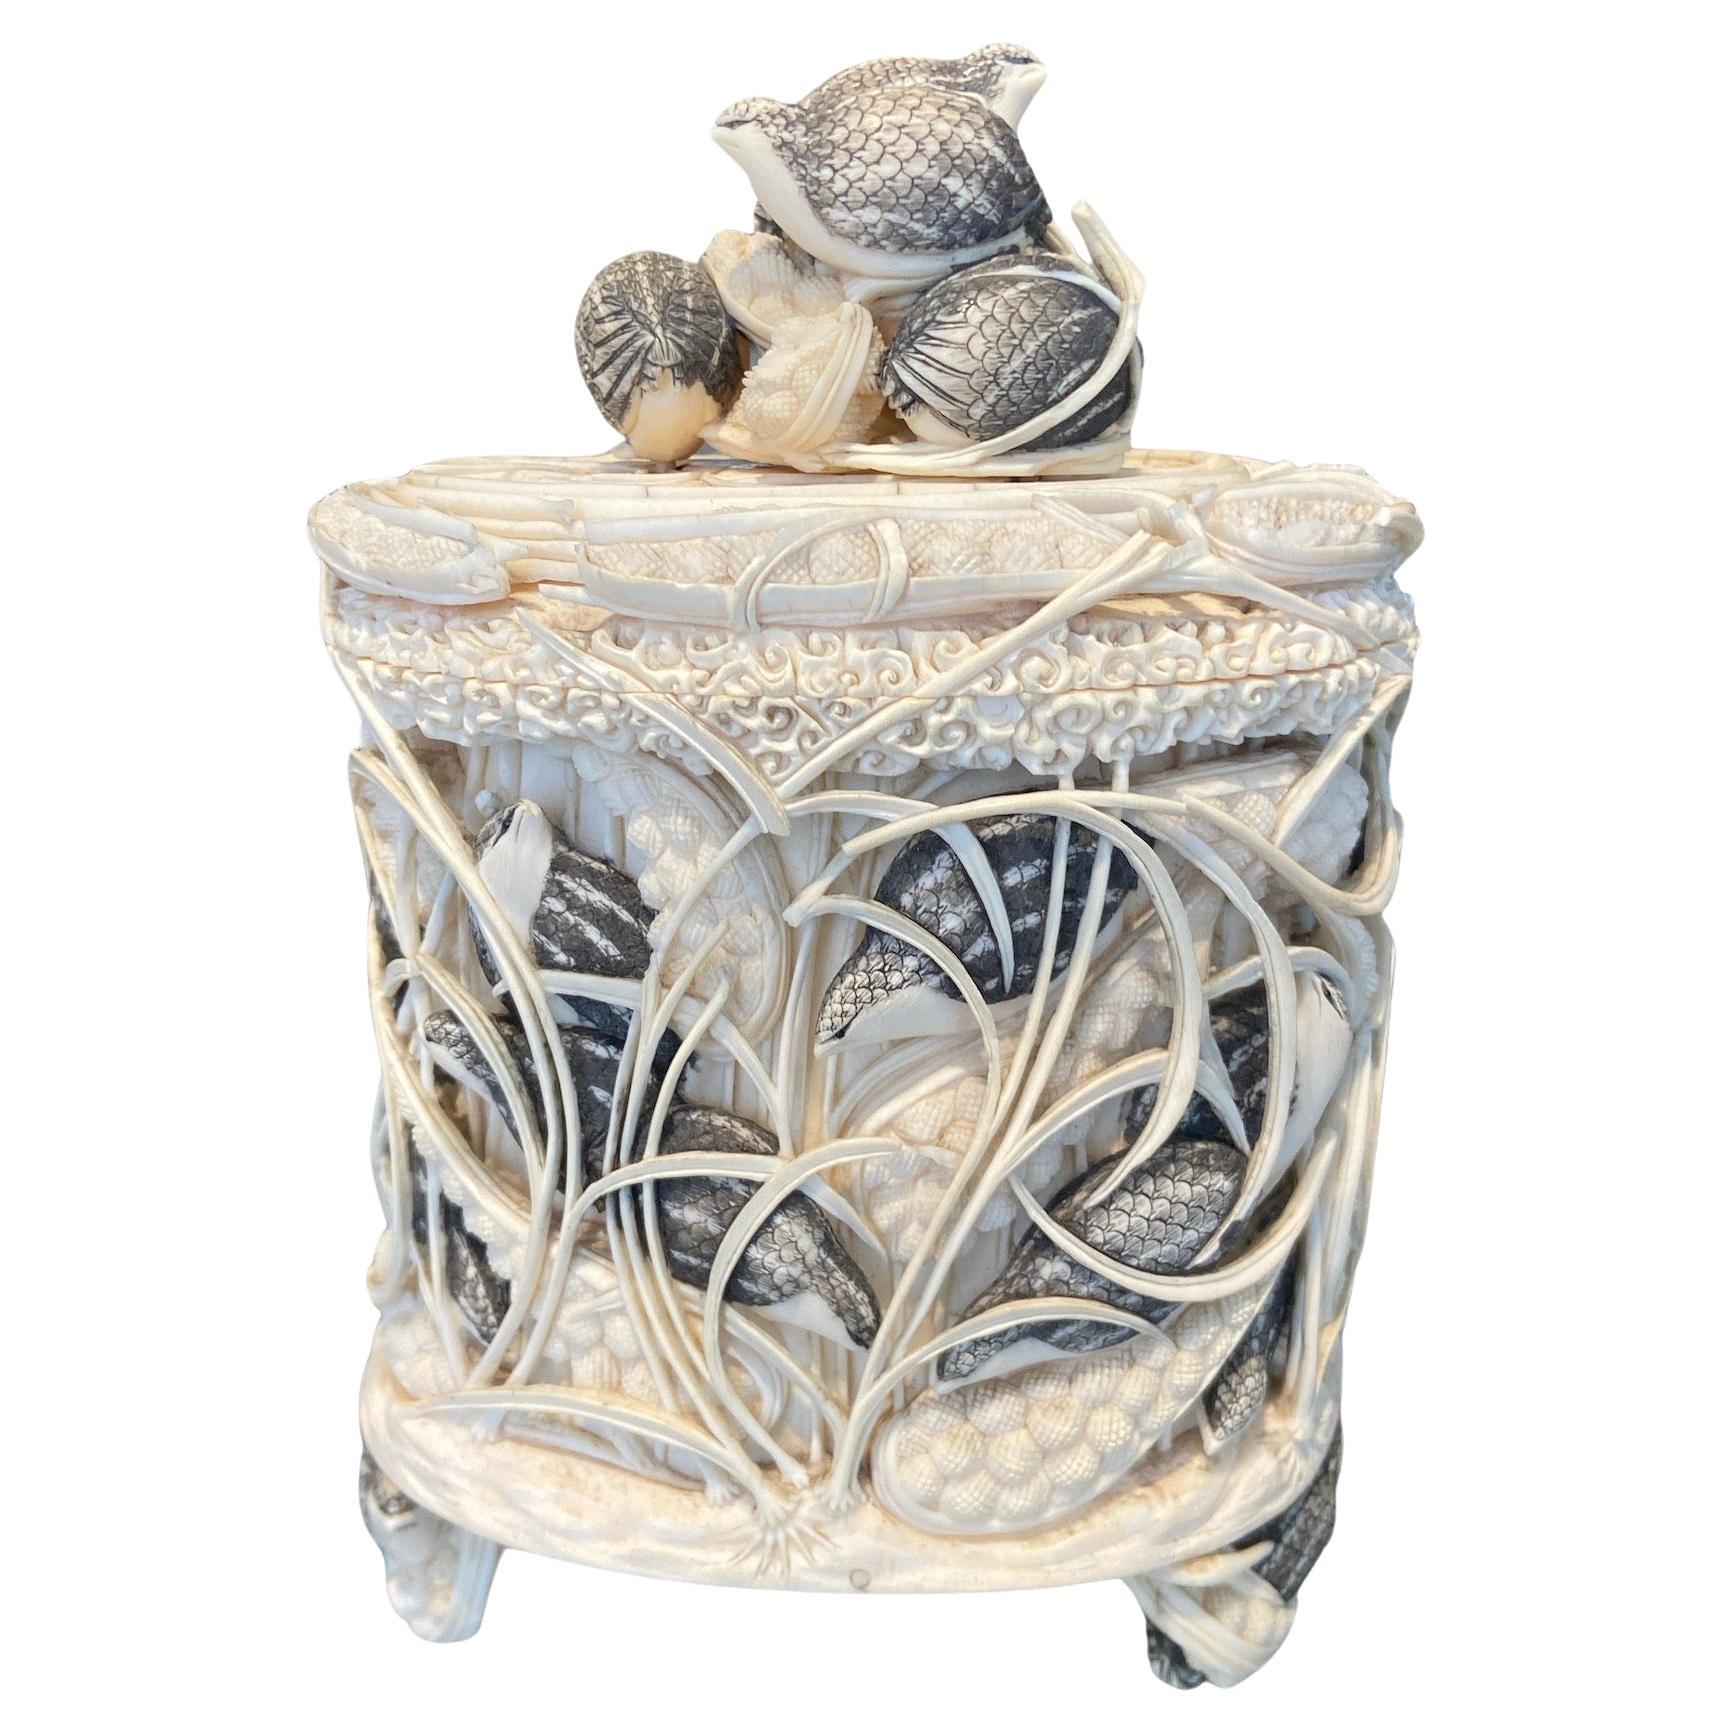 Oval box in ivory decorated with guinea fowl in the reeds. 